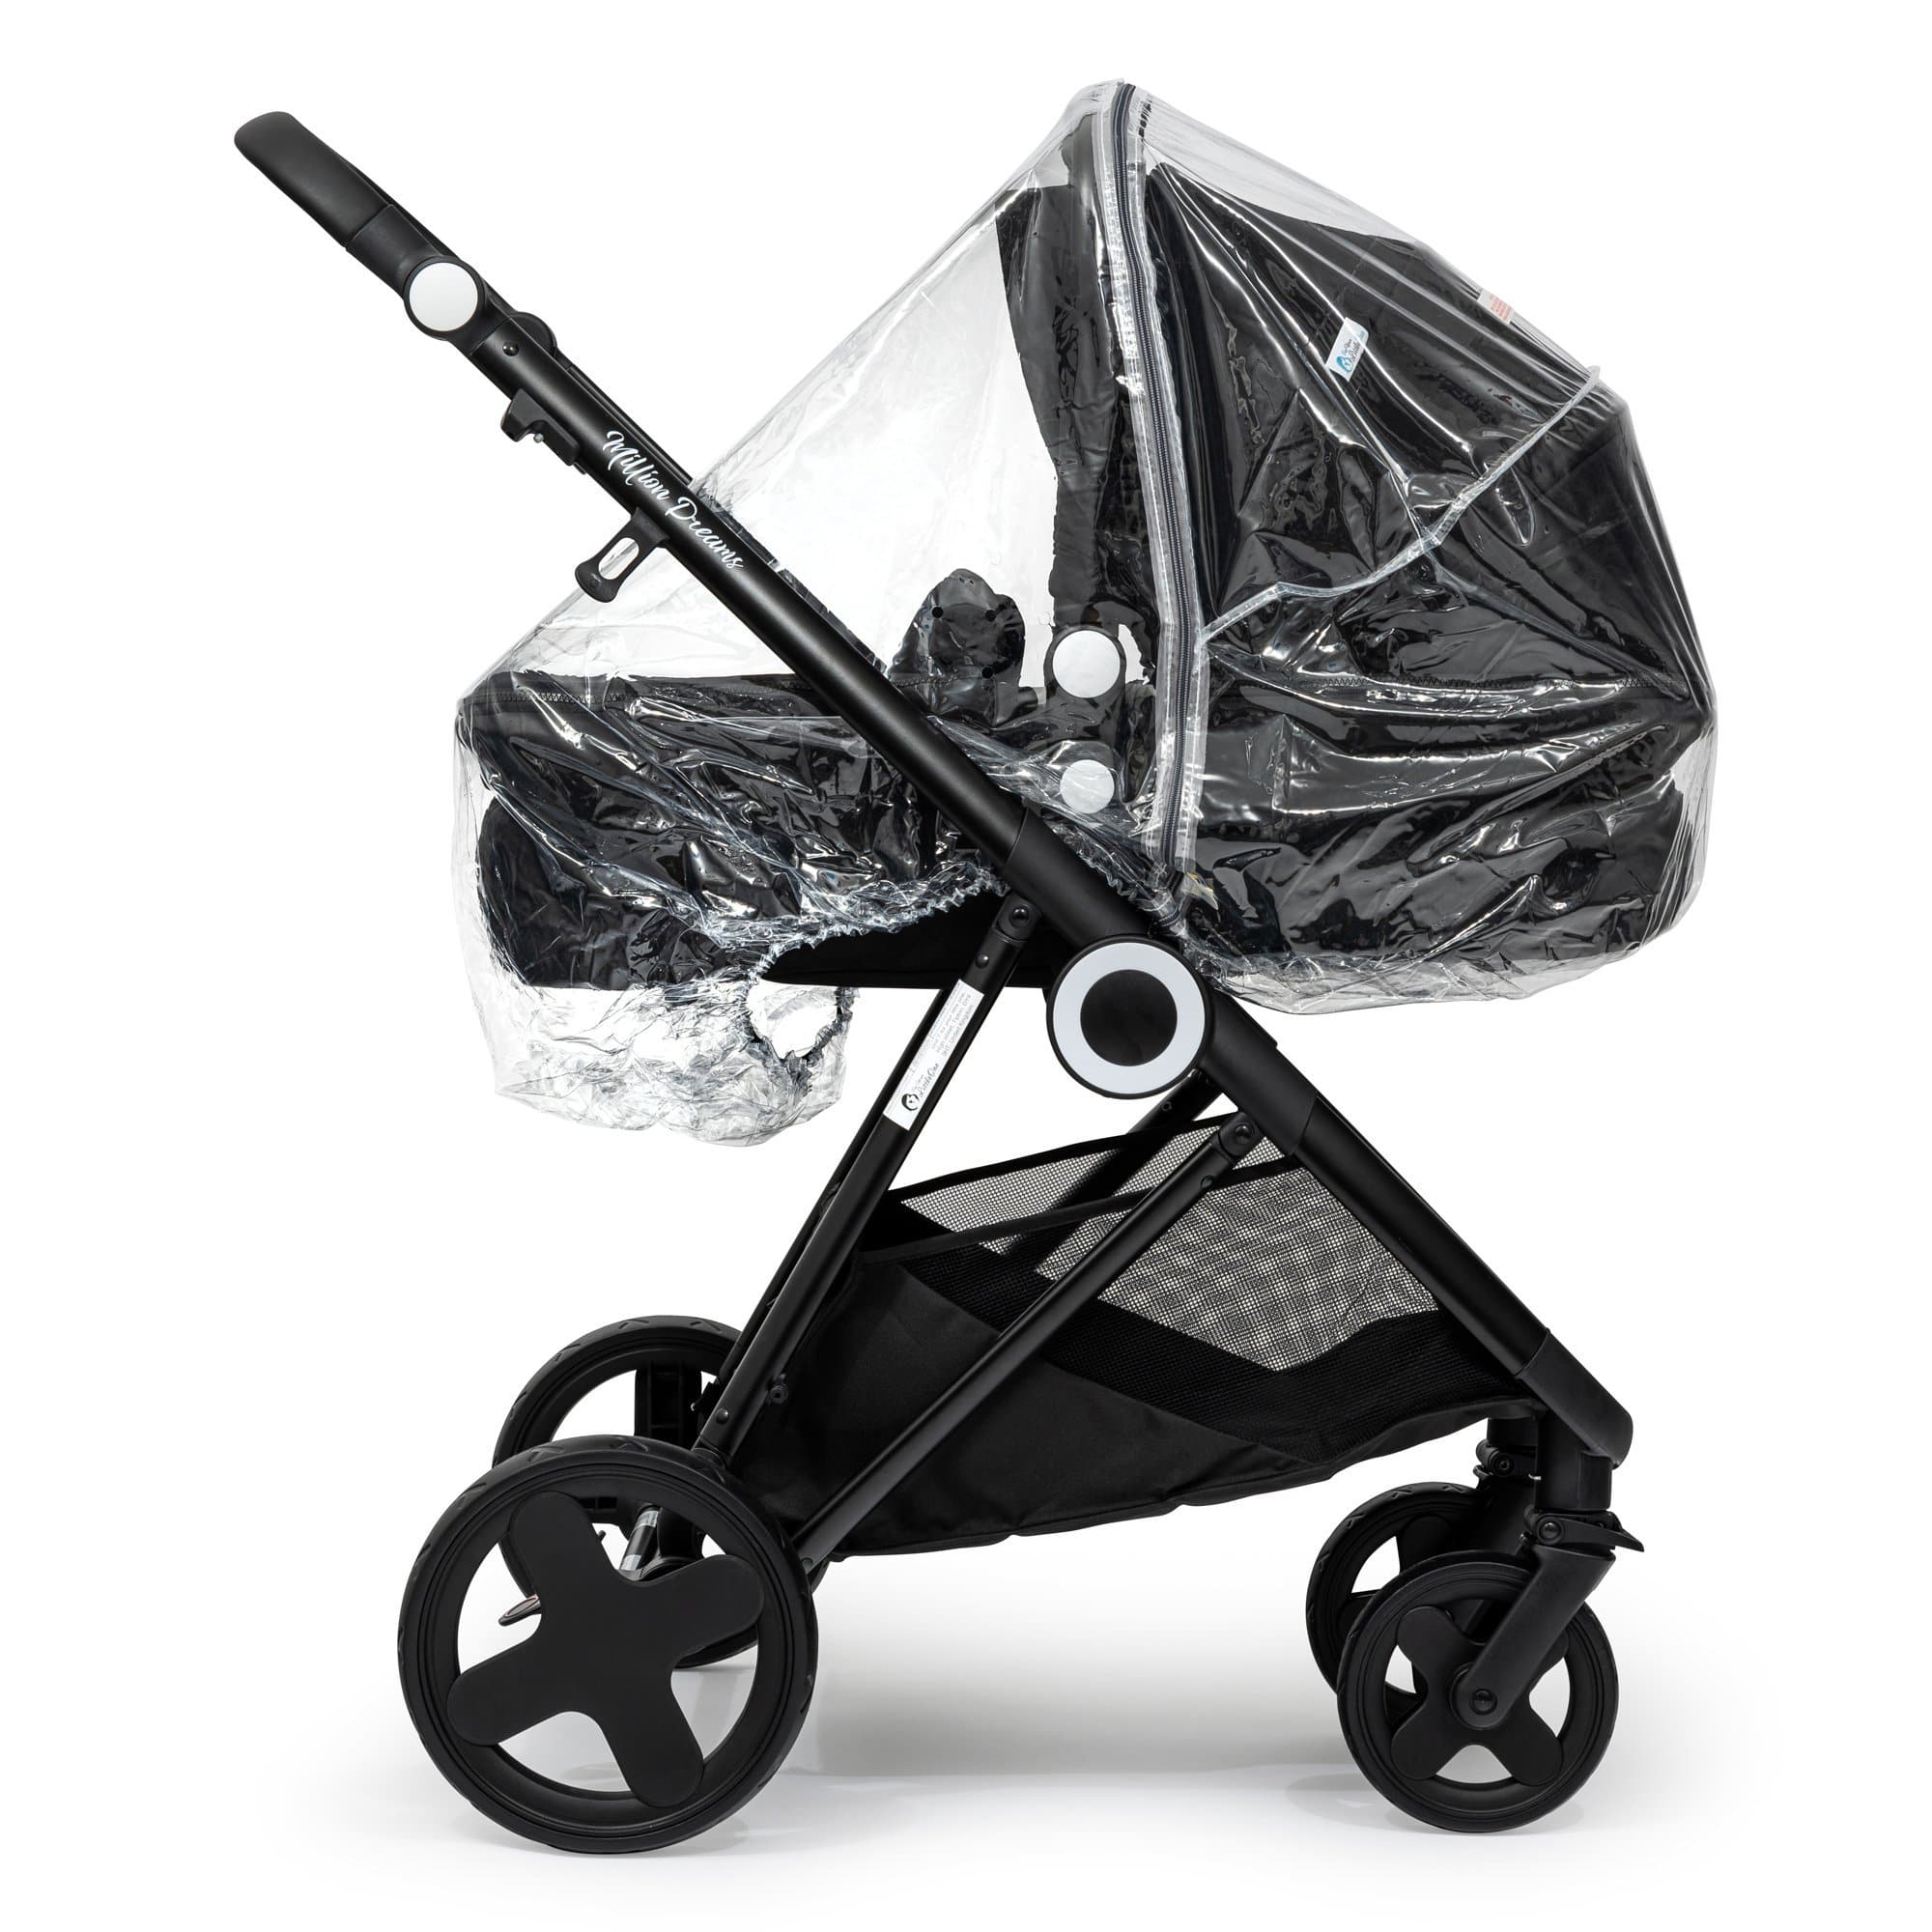 2 in 1 Rain Cover Compatible with Kids Kargo - Fits All Models - For Your Little One